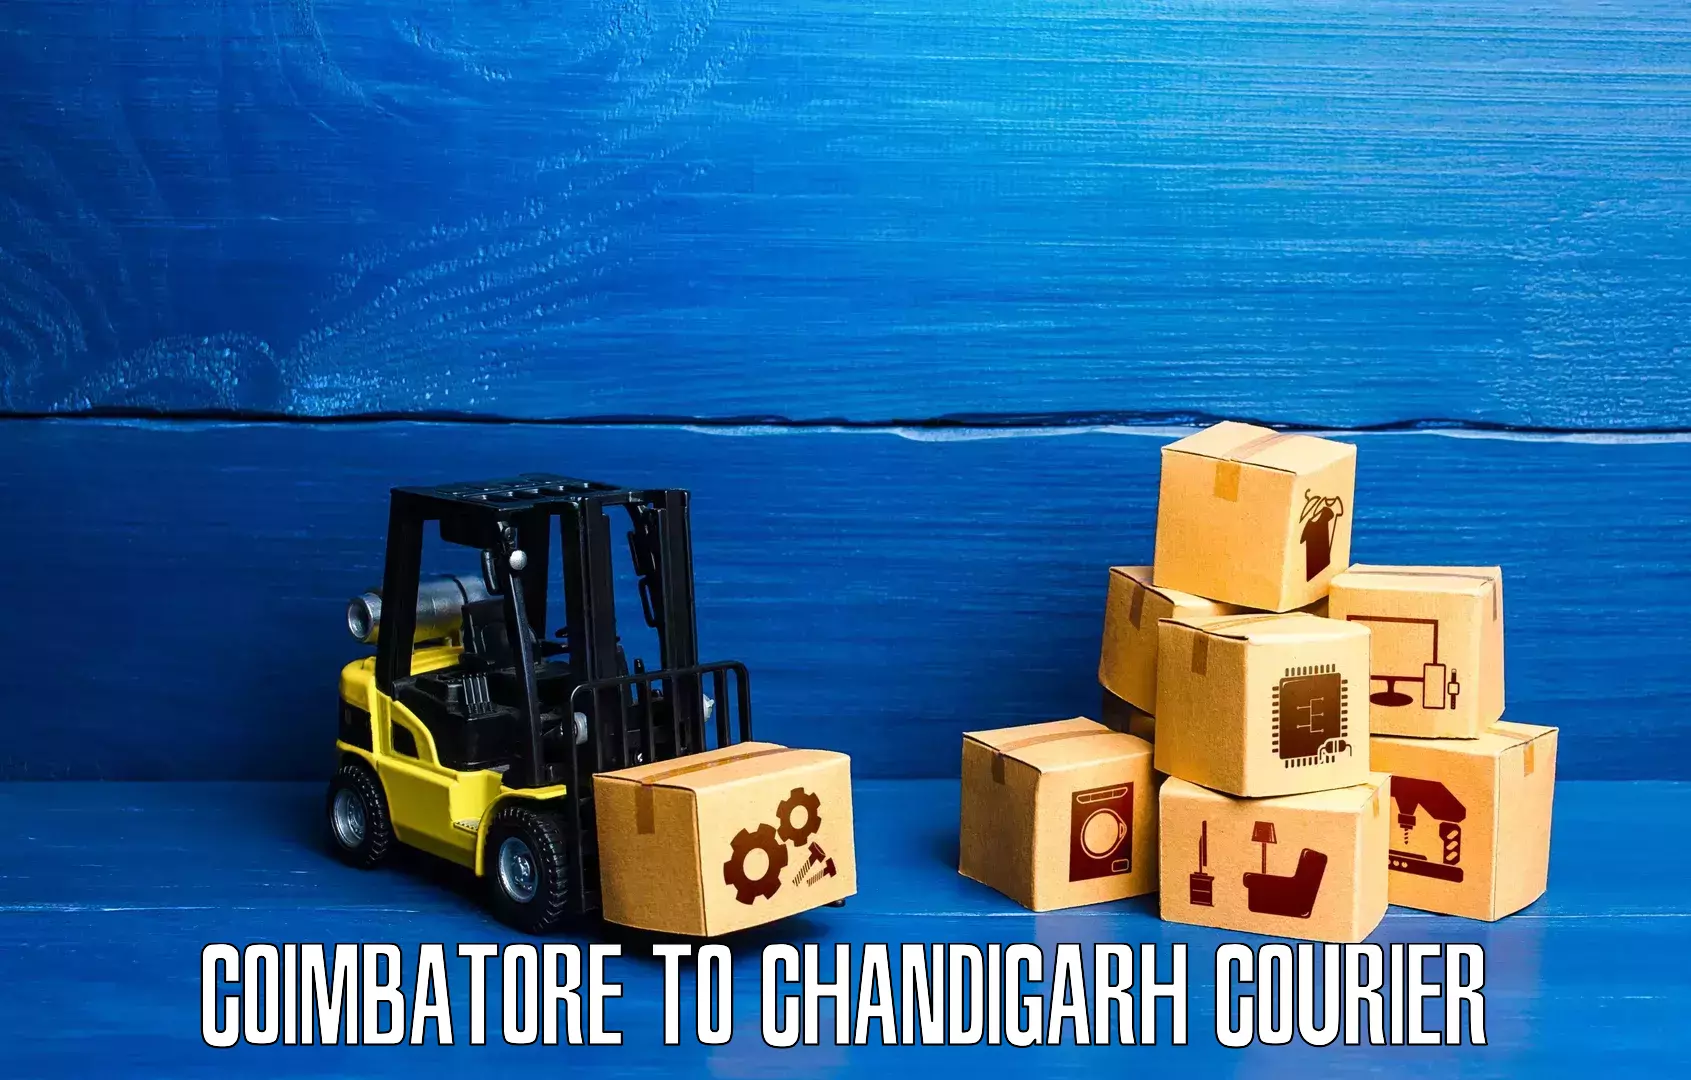 Express package services Coimbatore to Chandigarh